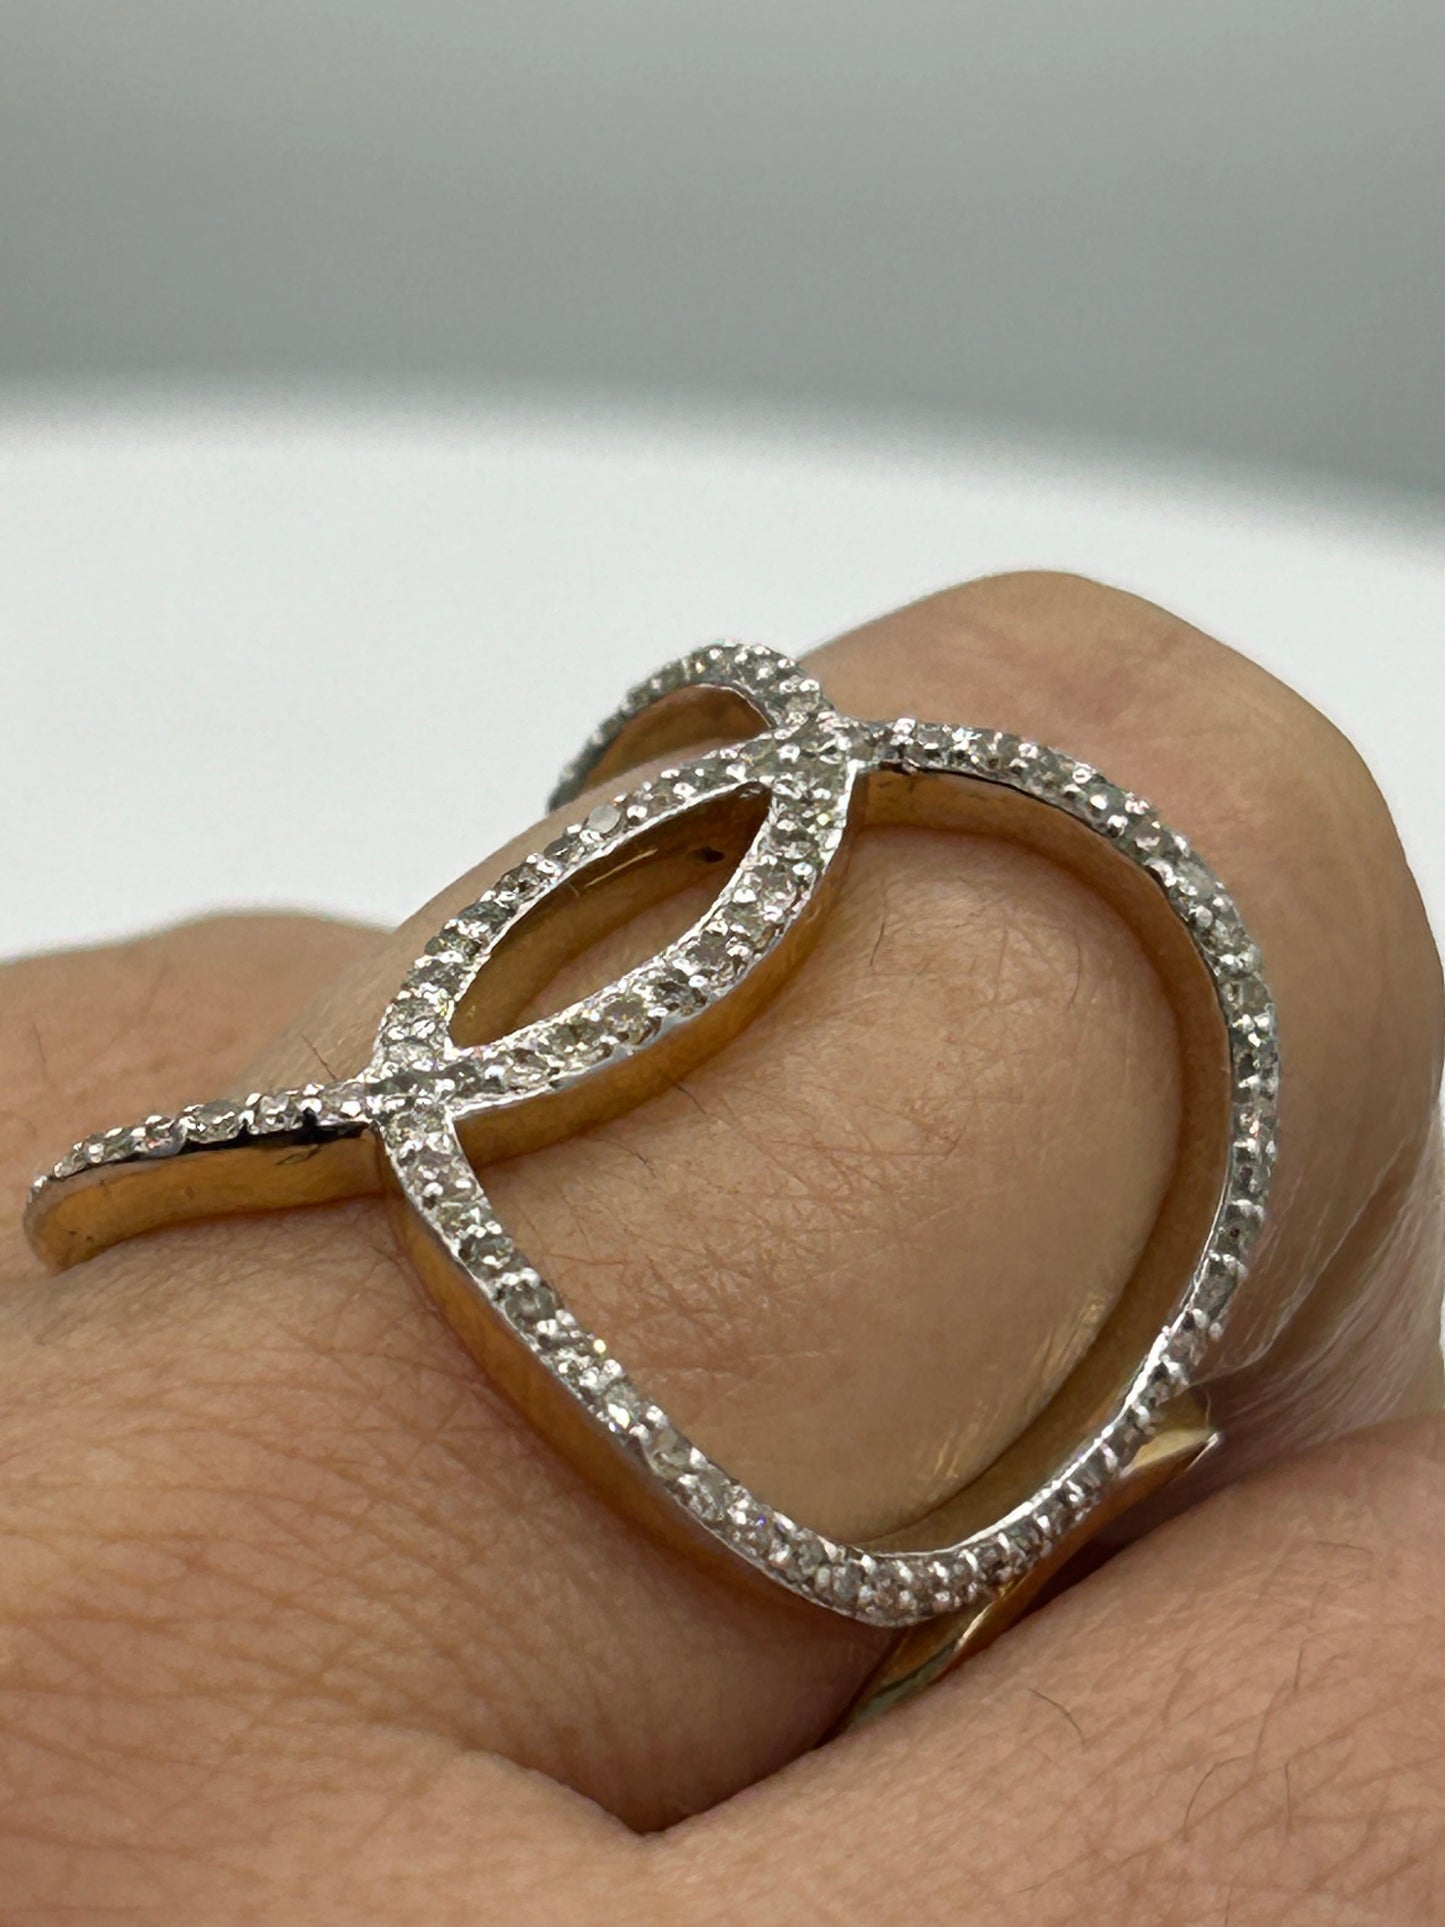 14k Solid Gold Diamond Rings. Genuine handmade pave diamond Rings. Approx Size 0.84 "(21 x 21 mm)